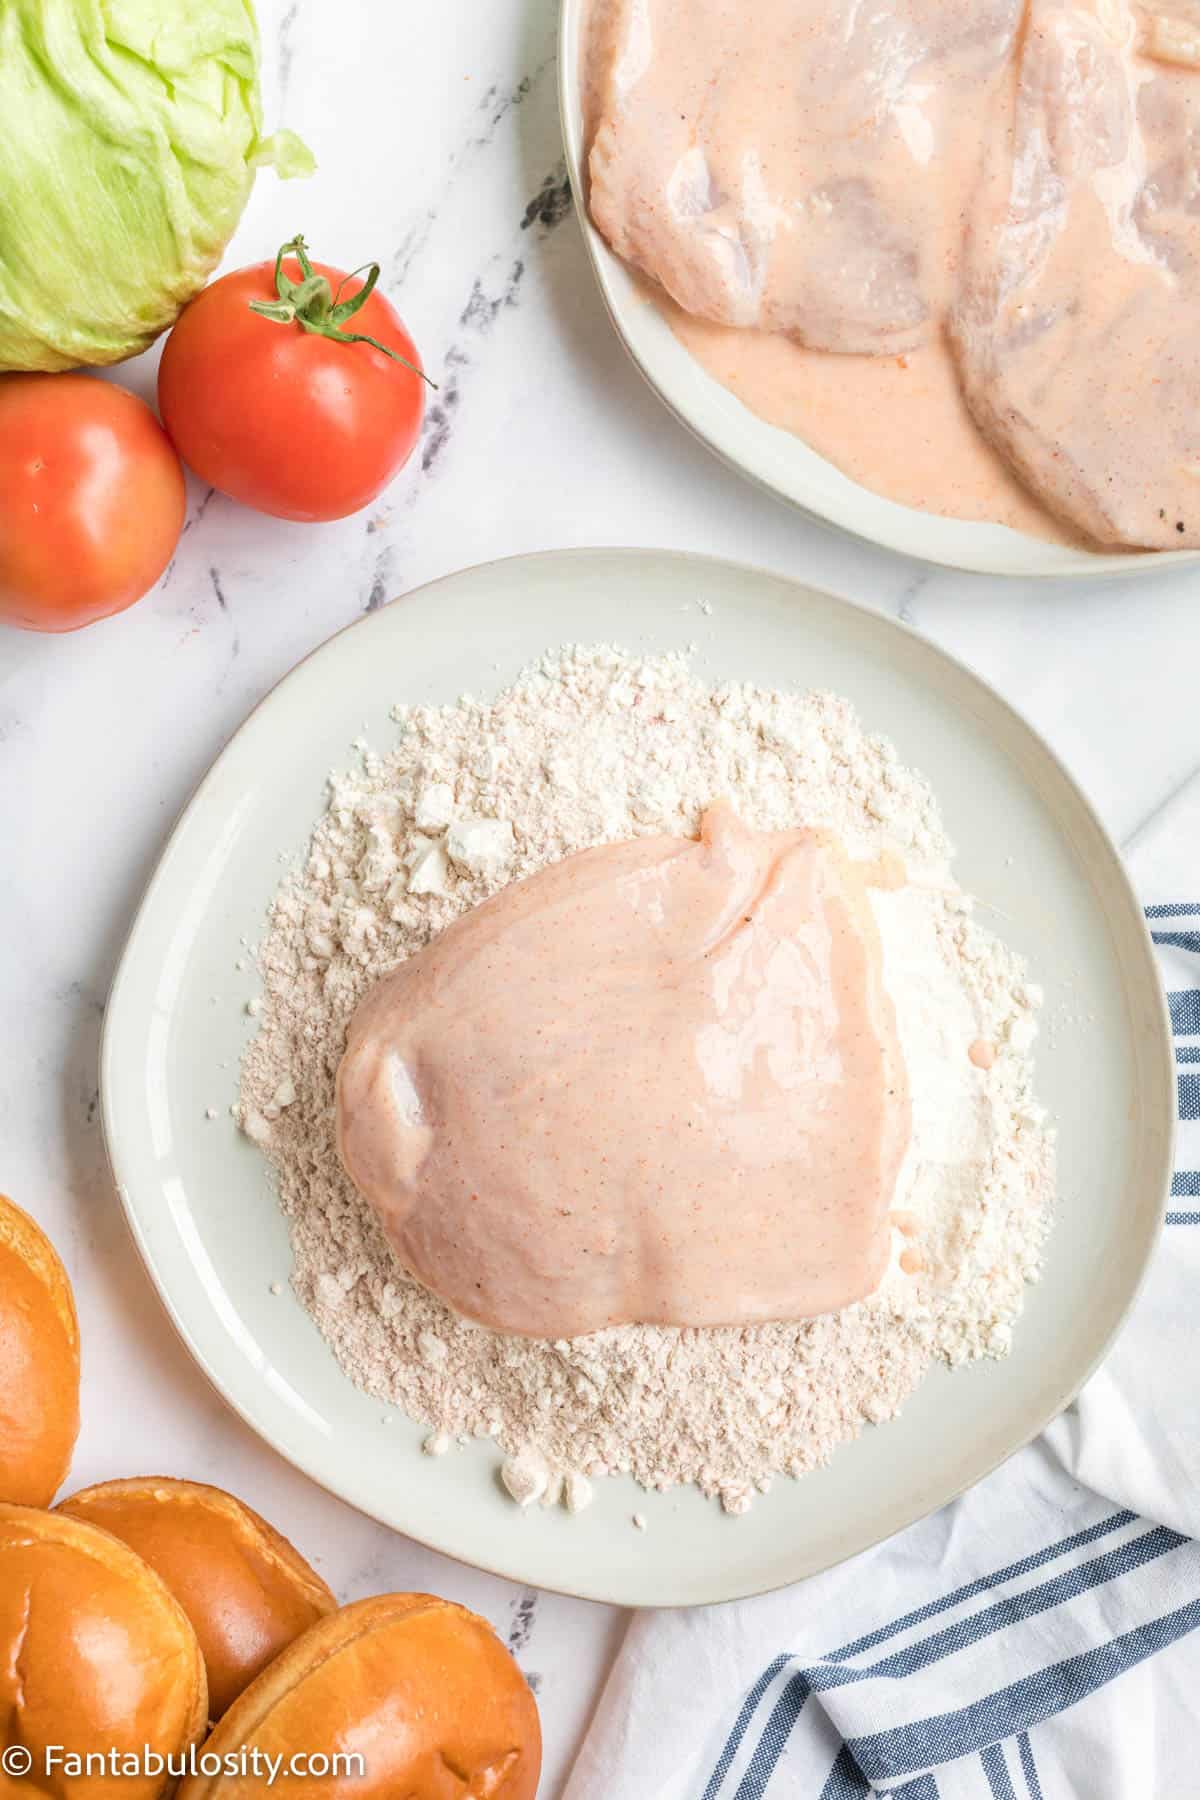 After dipping your chicken in the marinade mixture, coat it in the seasoned flour.